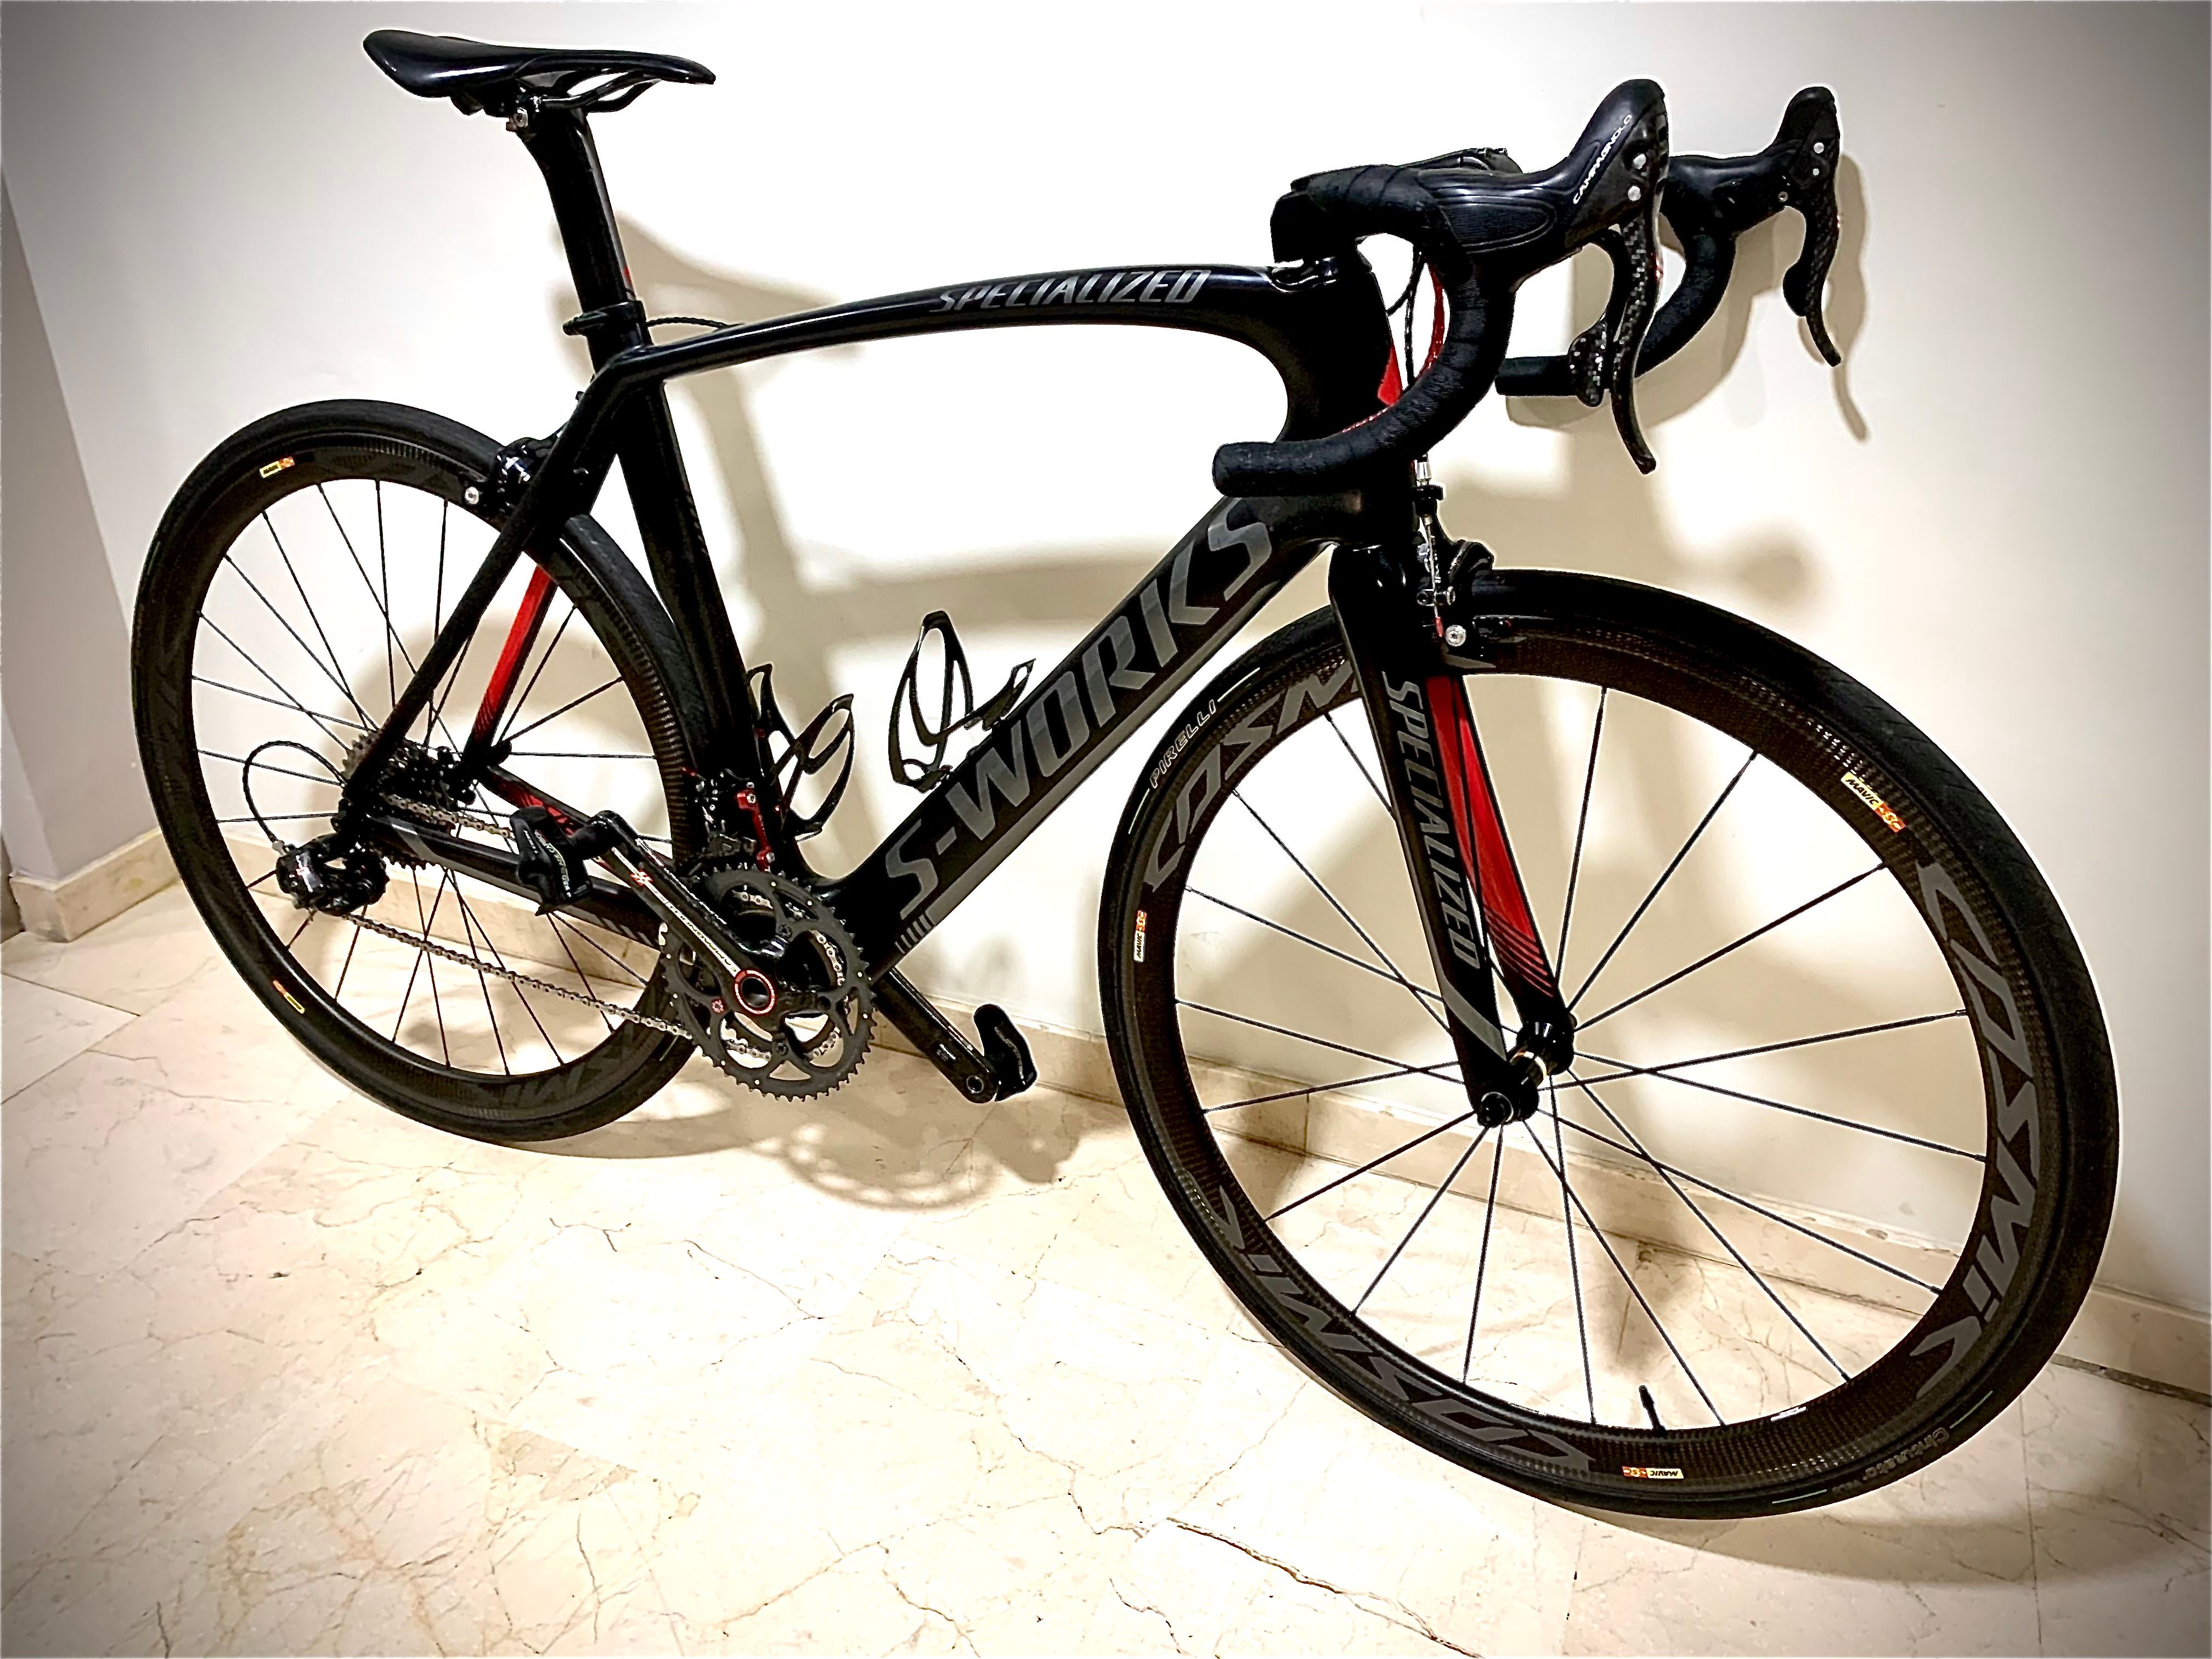 Specialized Venge Elite used in 54 cm | buycycle USA